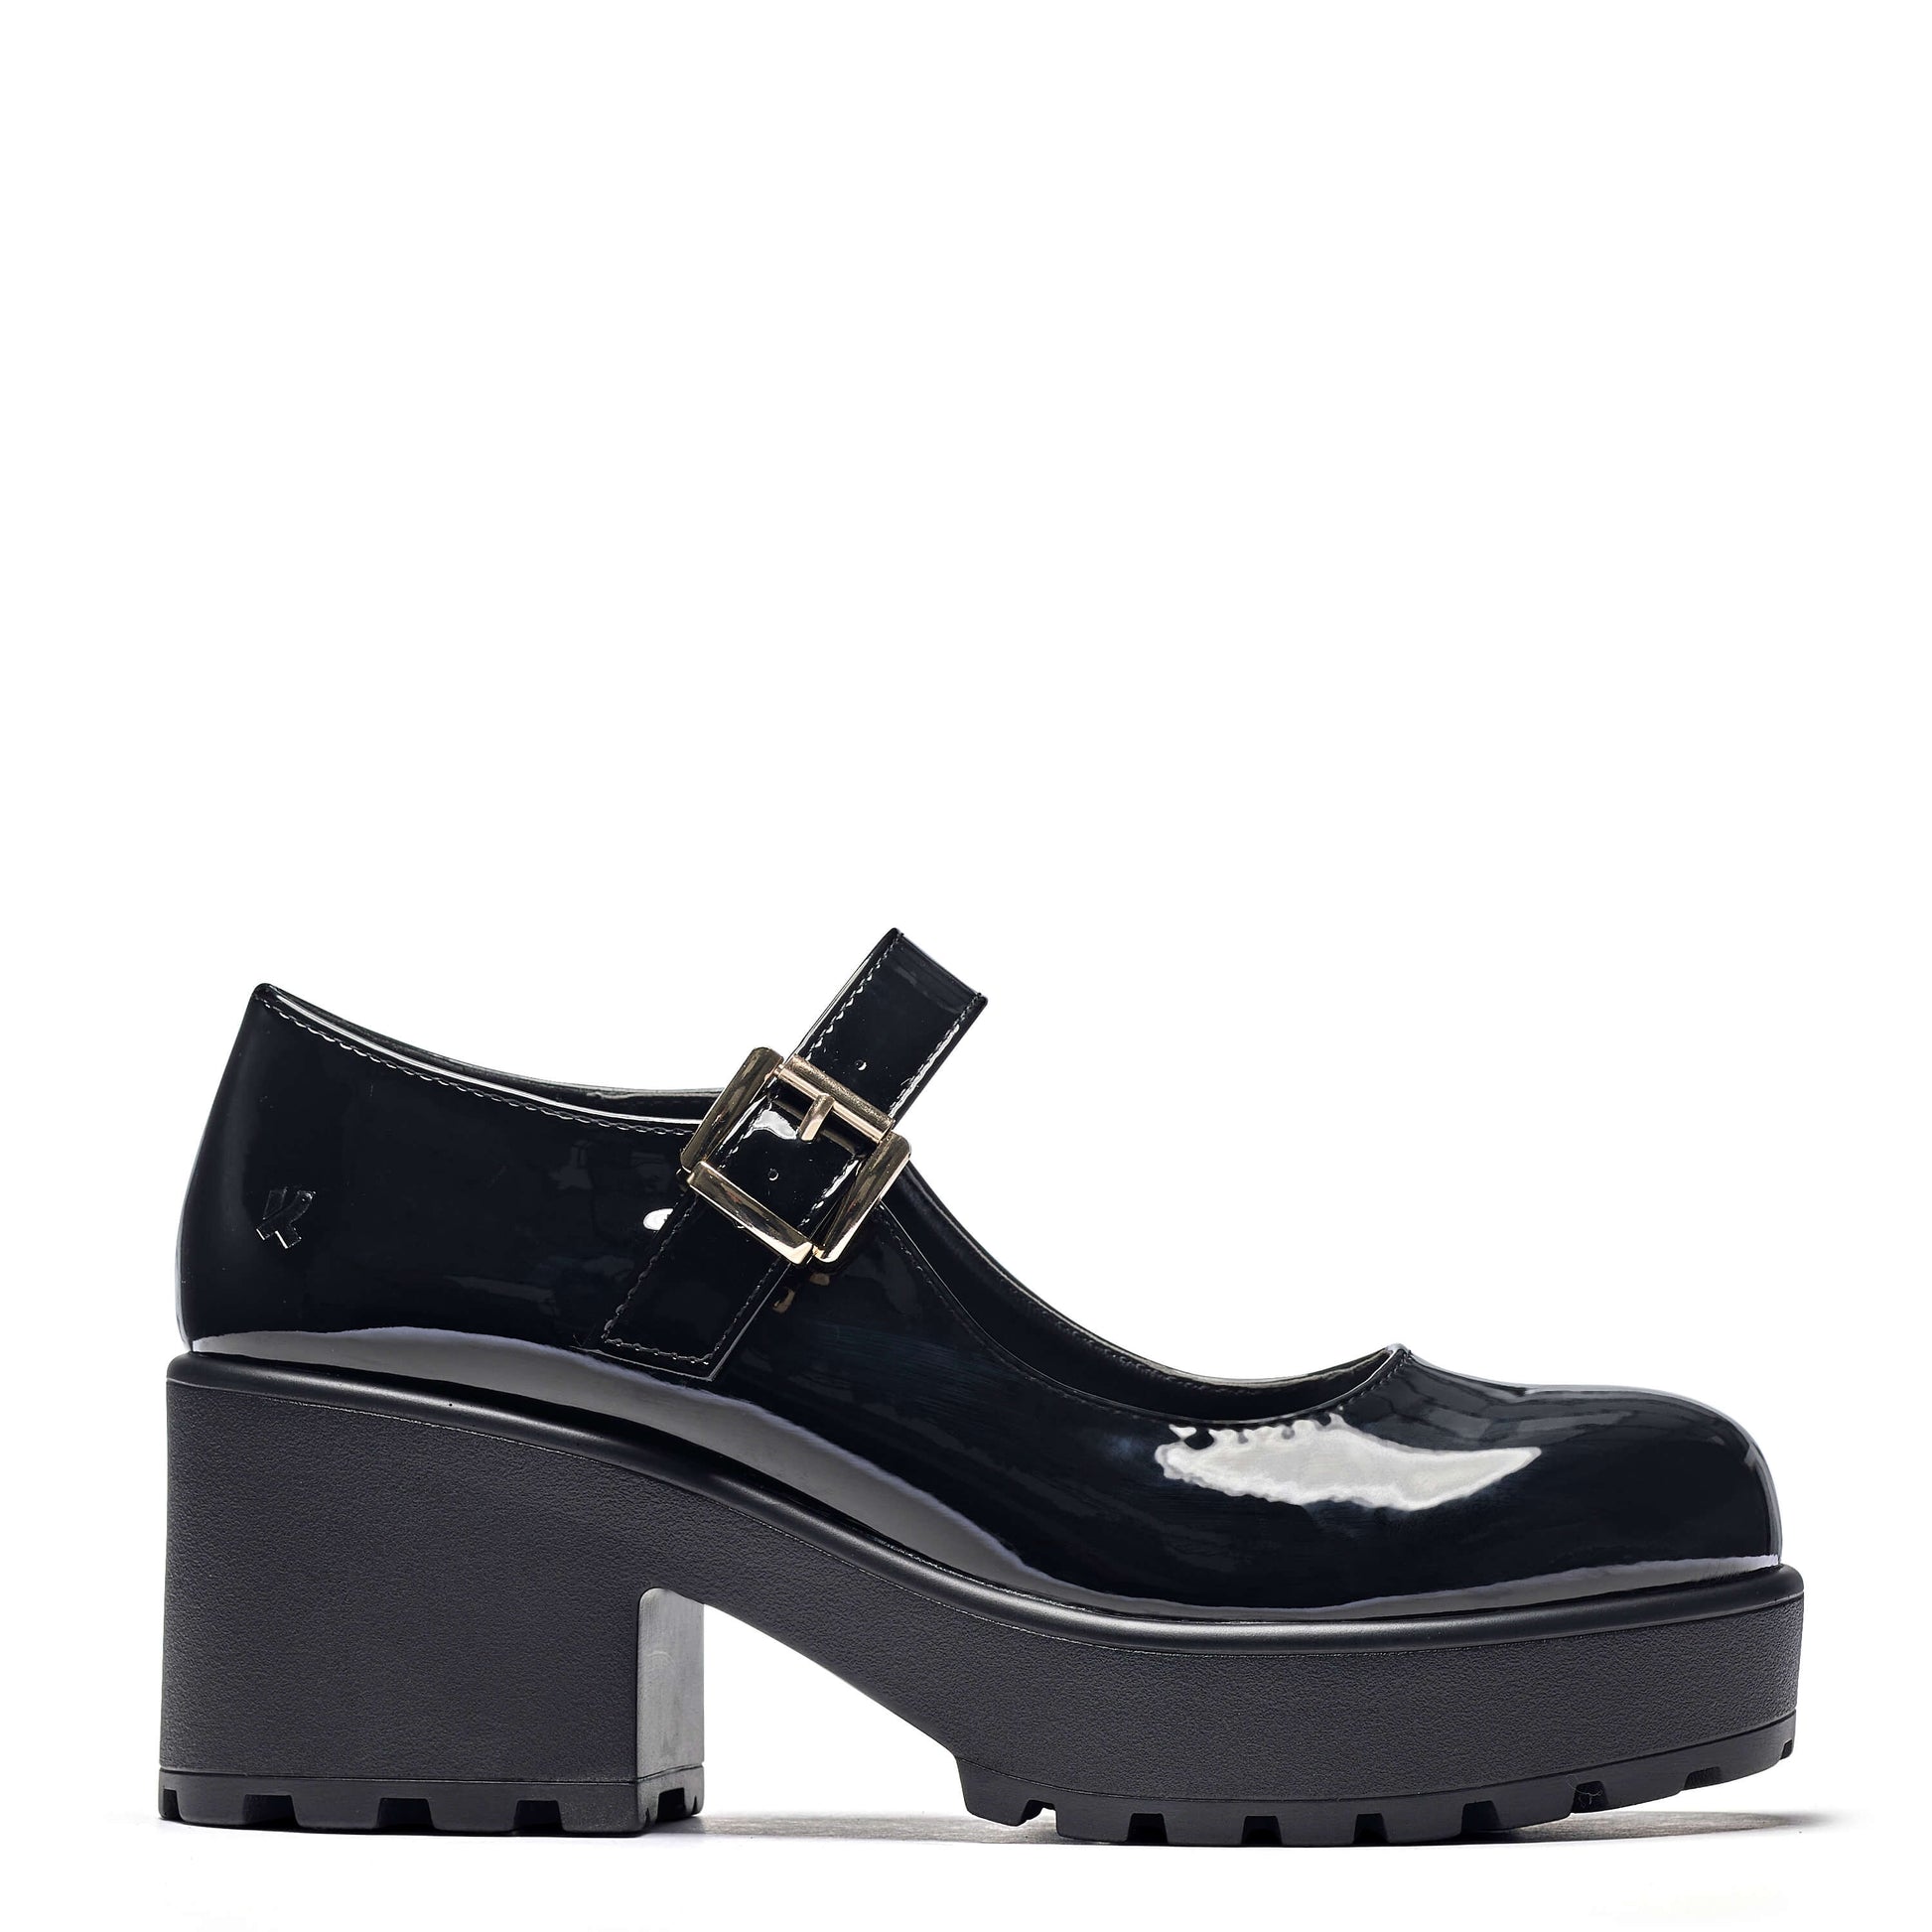 TIRA Black Mary Jane Shoes 'Patent Edition' - Mary Janes - KOI Footwear - Black Patent - Side View